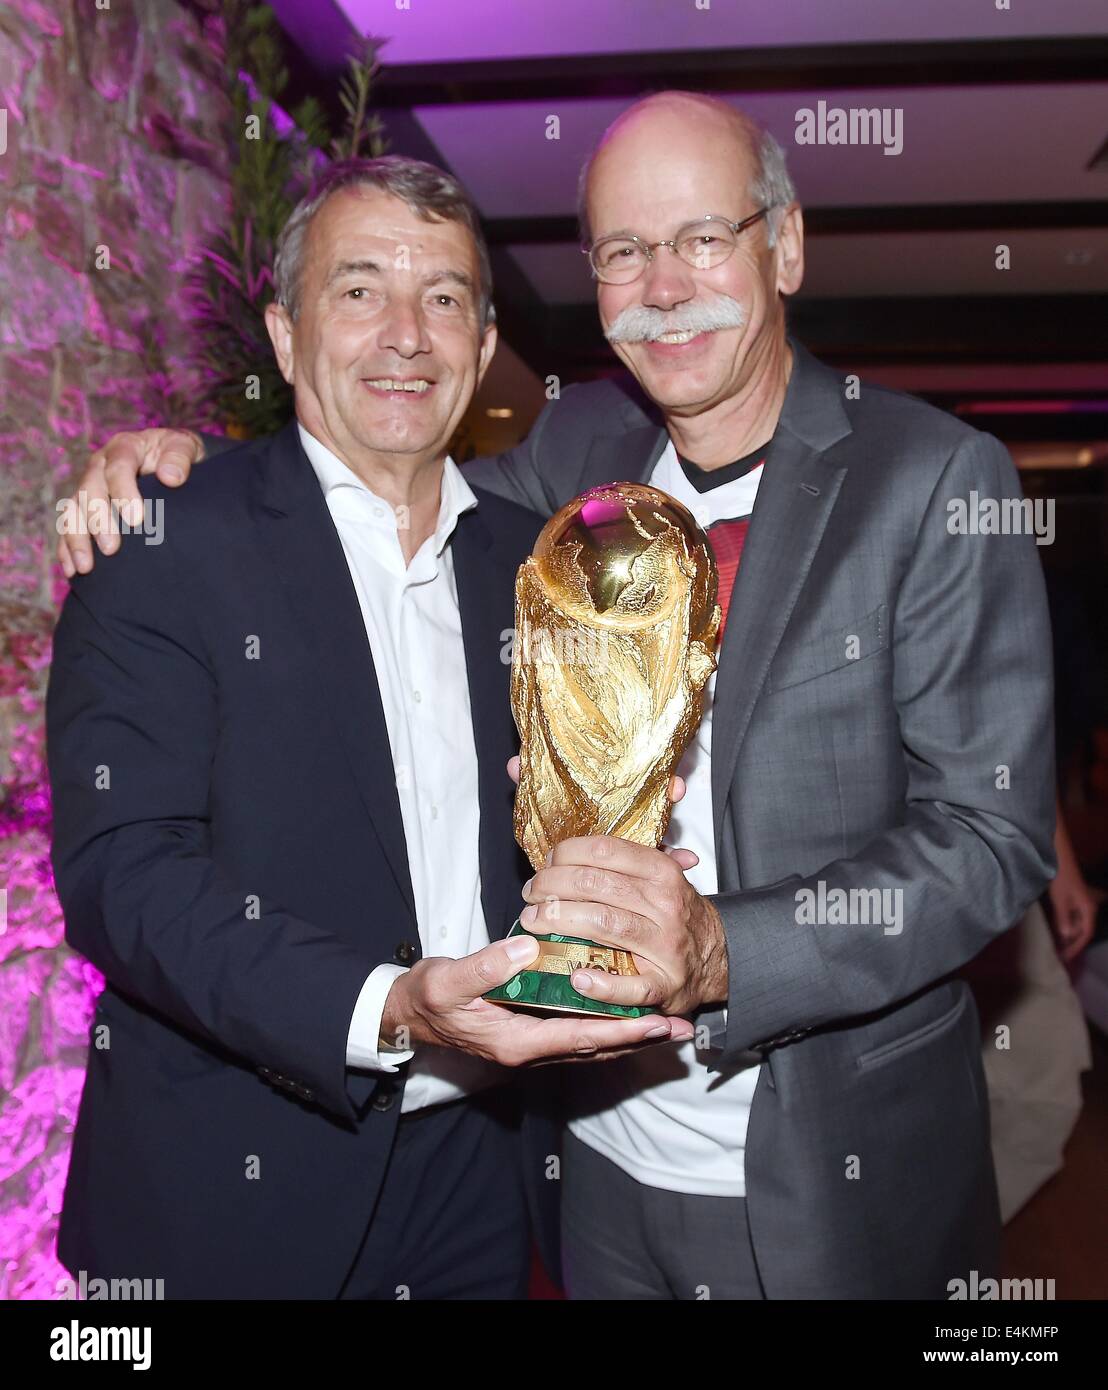 Handout: Rio de Janeiro, Brazil. 14th July, 2014. The handout photo released by Ges/Markus Gilliar on 14 July 2014 shows Dieter Zetsche (R), Chairman of Damiler AG congratulating DFB President Wolfgang Niersbach on Germany's victory over Argentina in the Soccer World Cup with the trophy at Hotel Sheraton in Rio De Janeiro, Brazil on 13 July 2014. Germany won the World Cup 1-0 after defeating Argentina. Credit:  dpa picture alliance/Alamy Live News Stock Photo